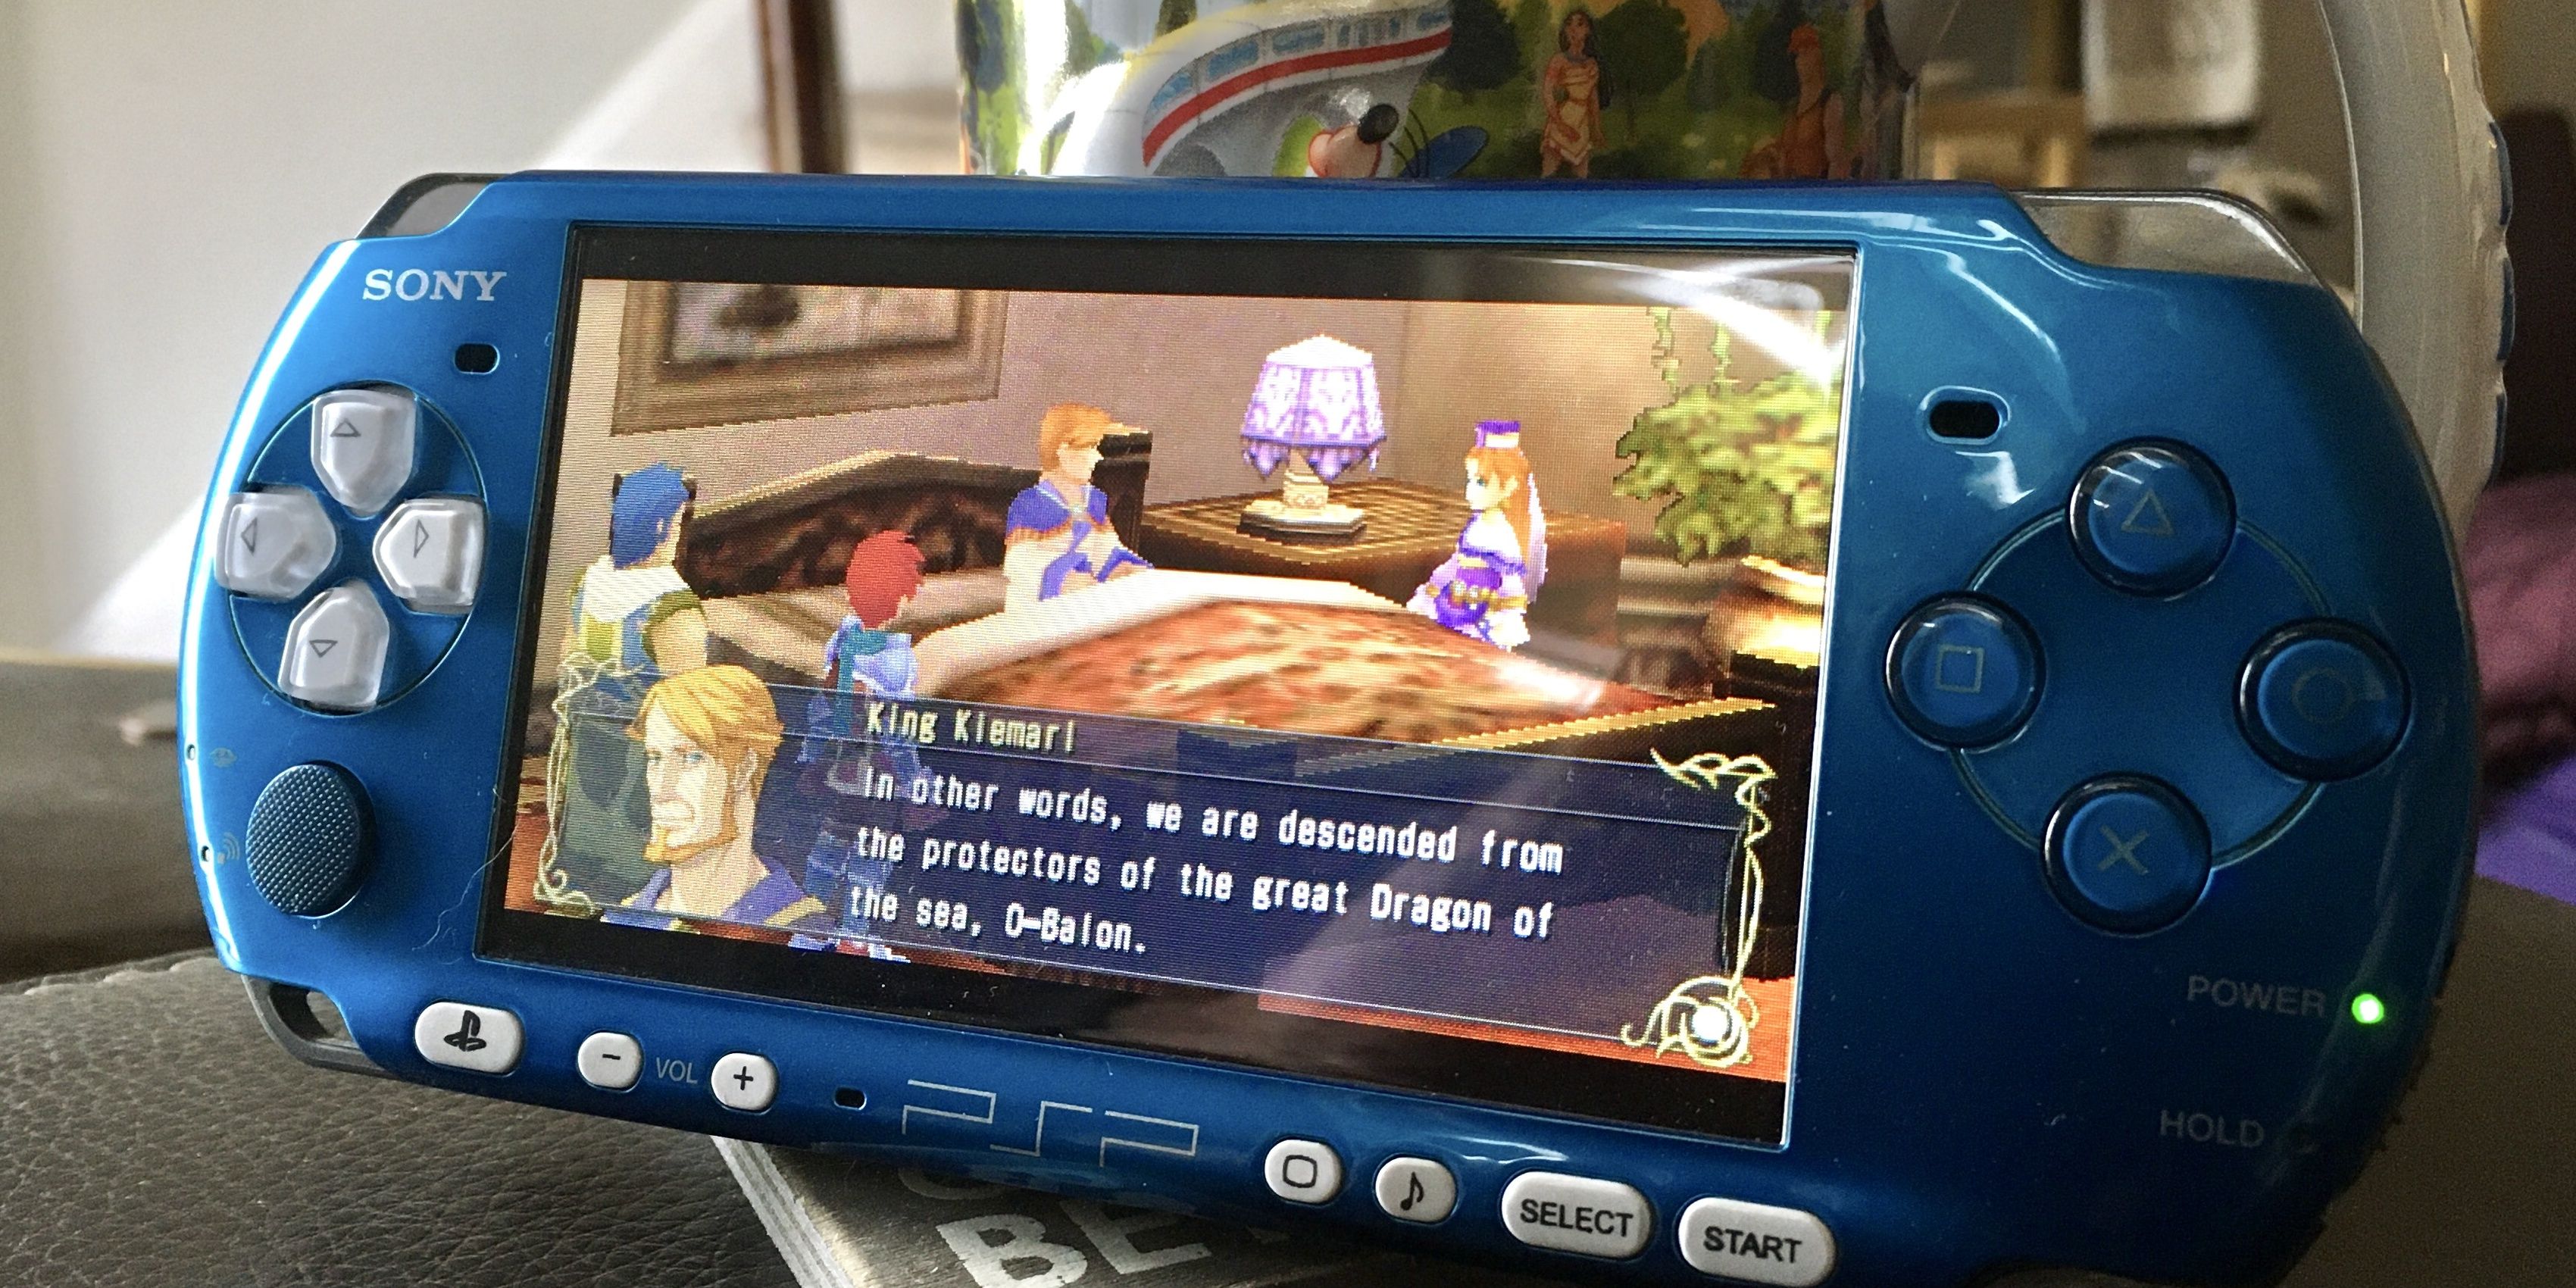 The blue PSP playing a game